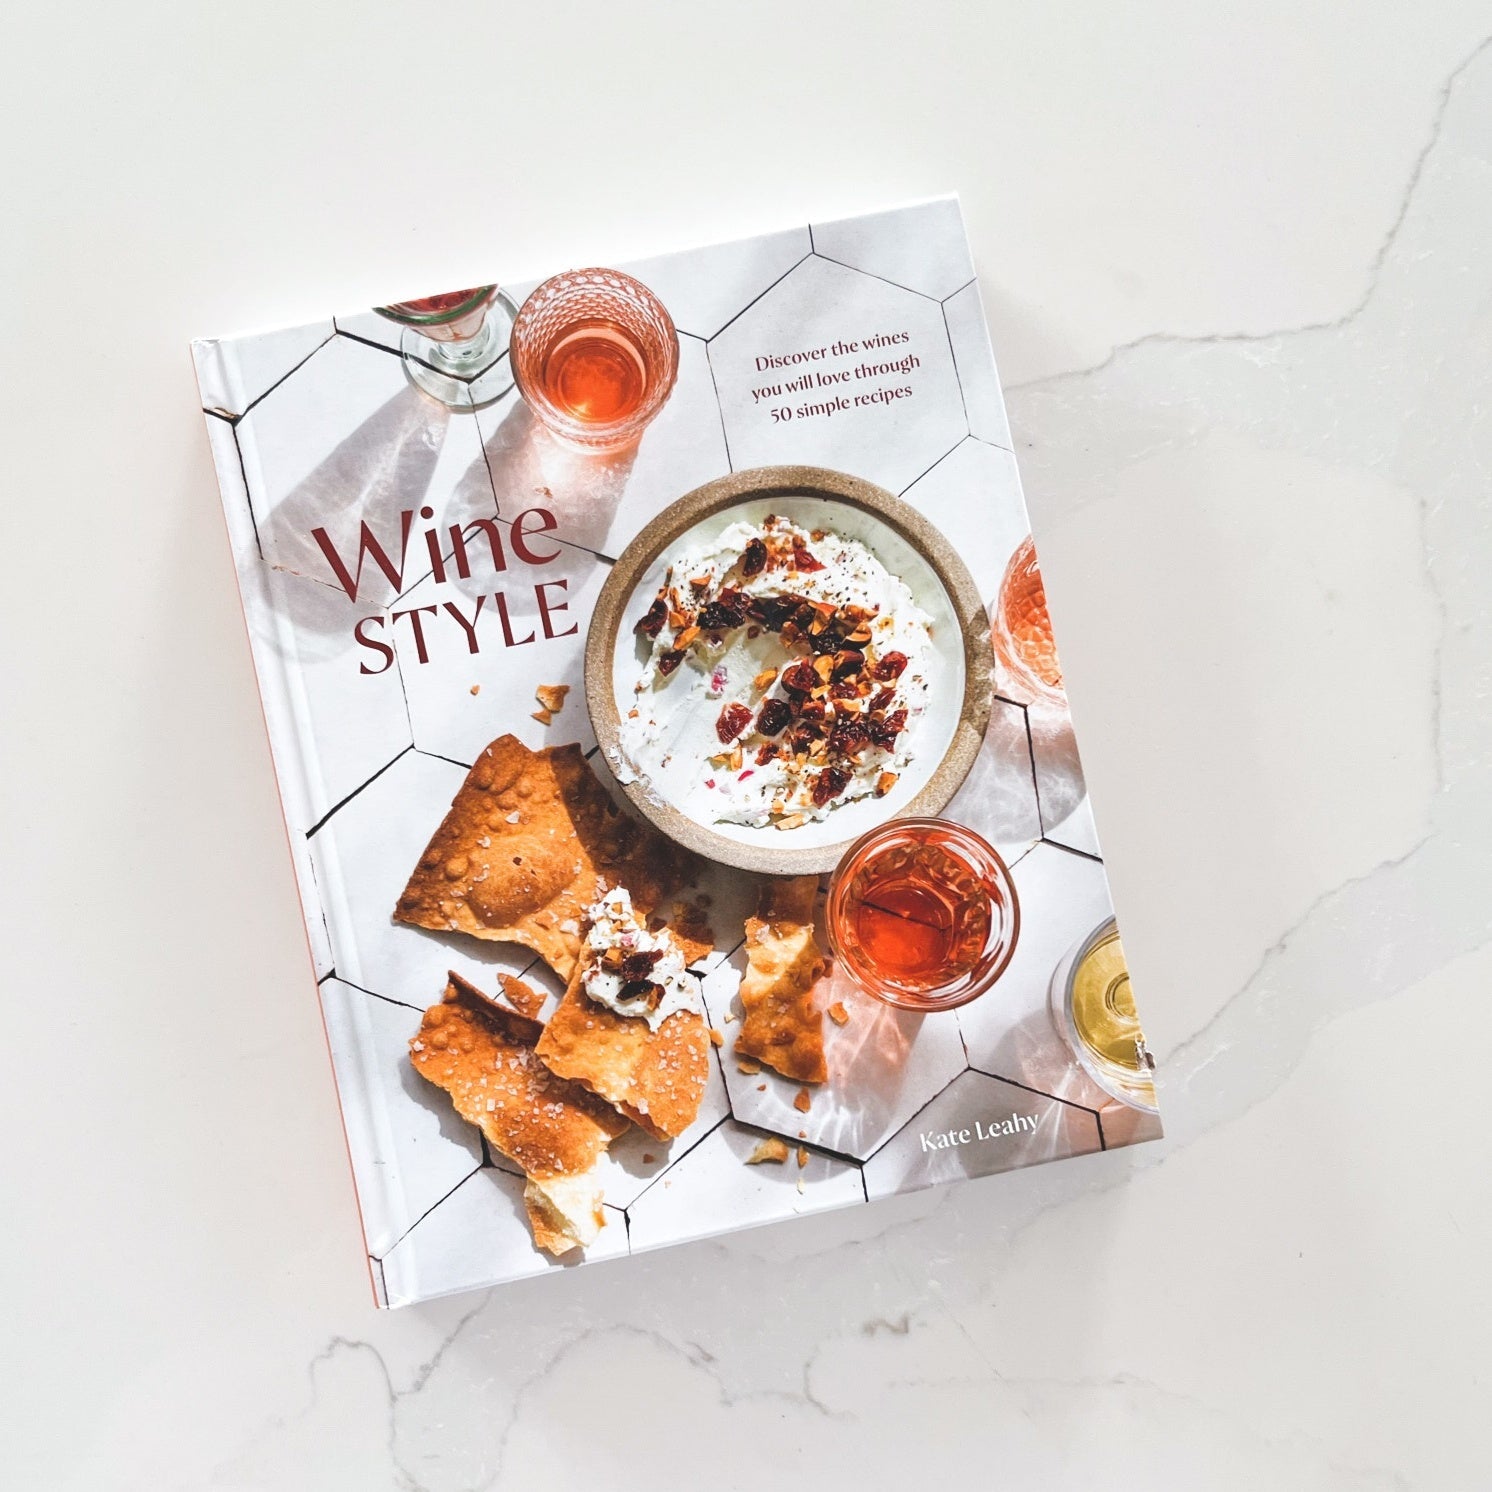 Wine style book on white marble background.